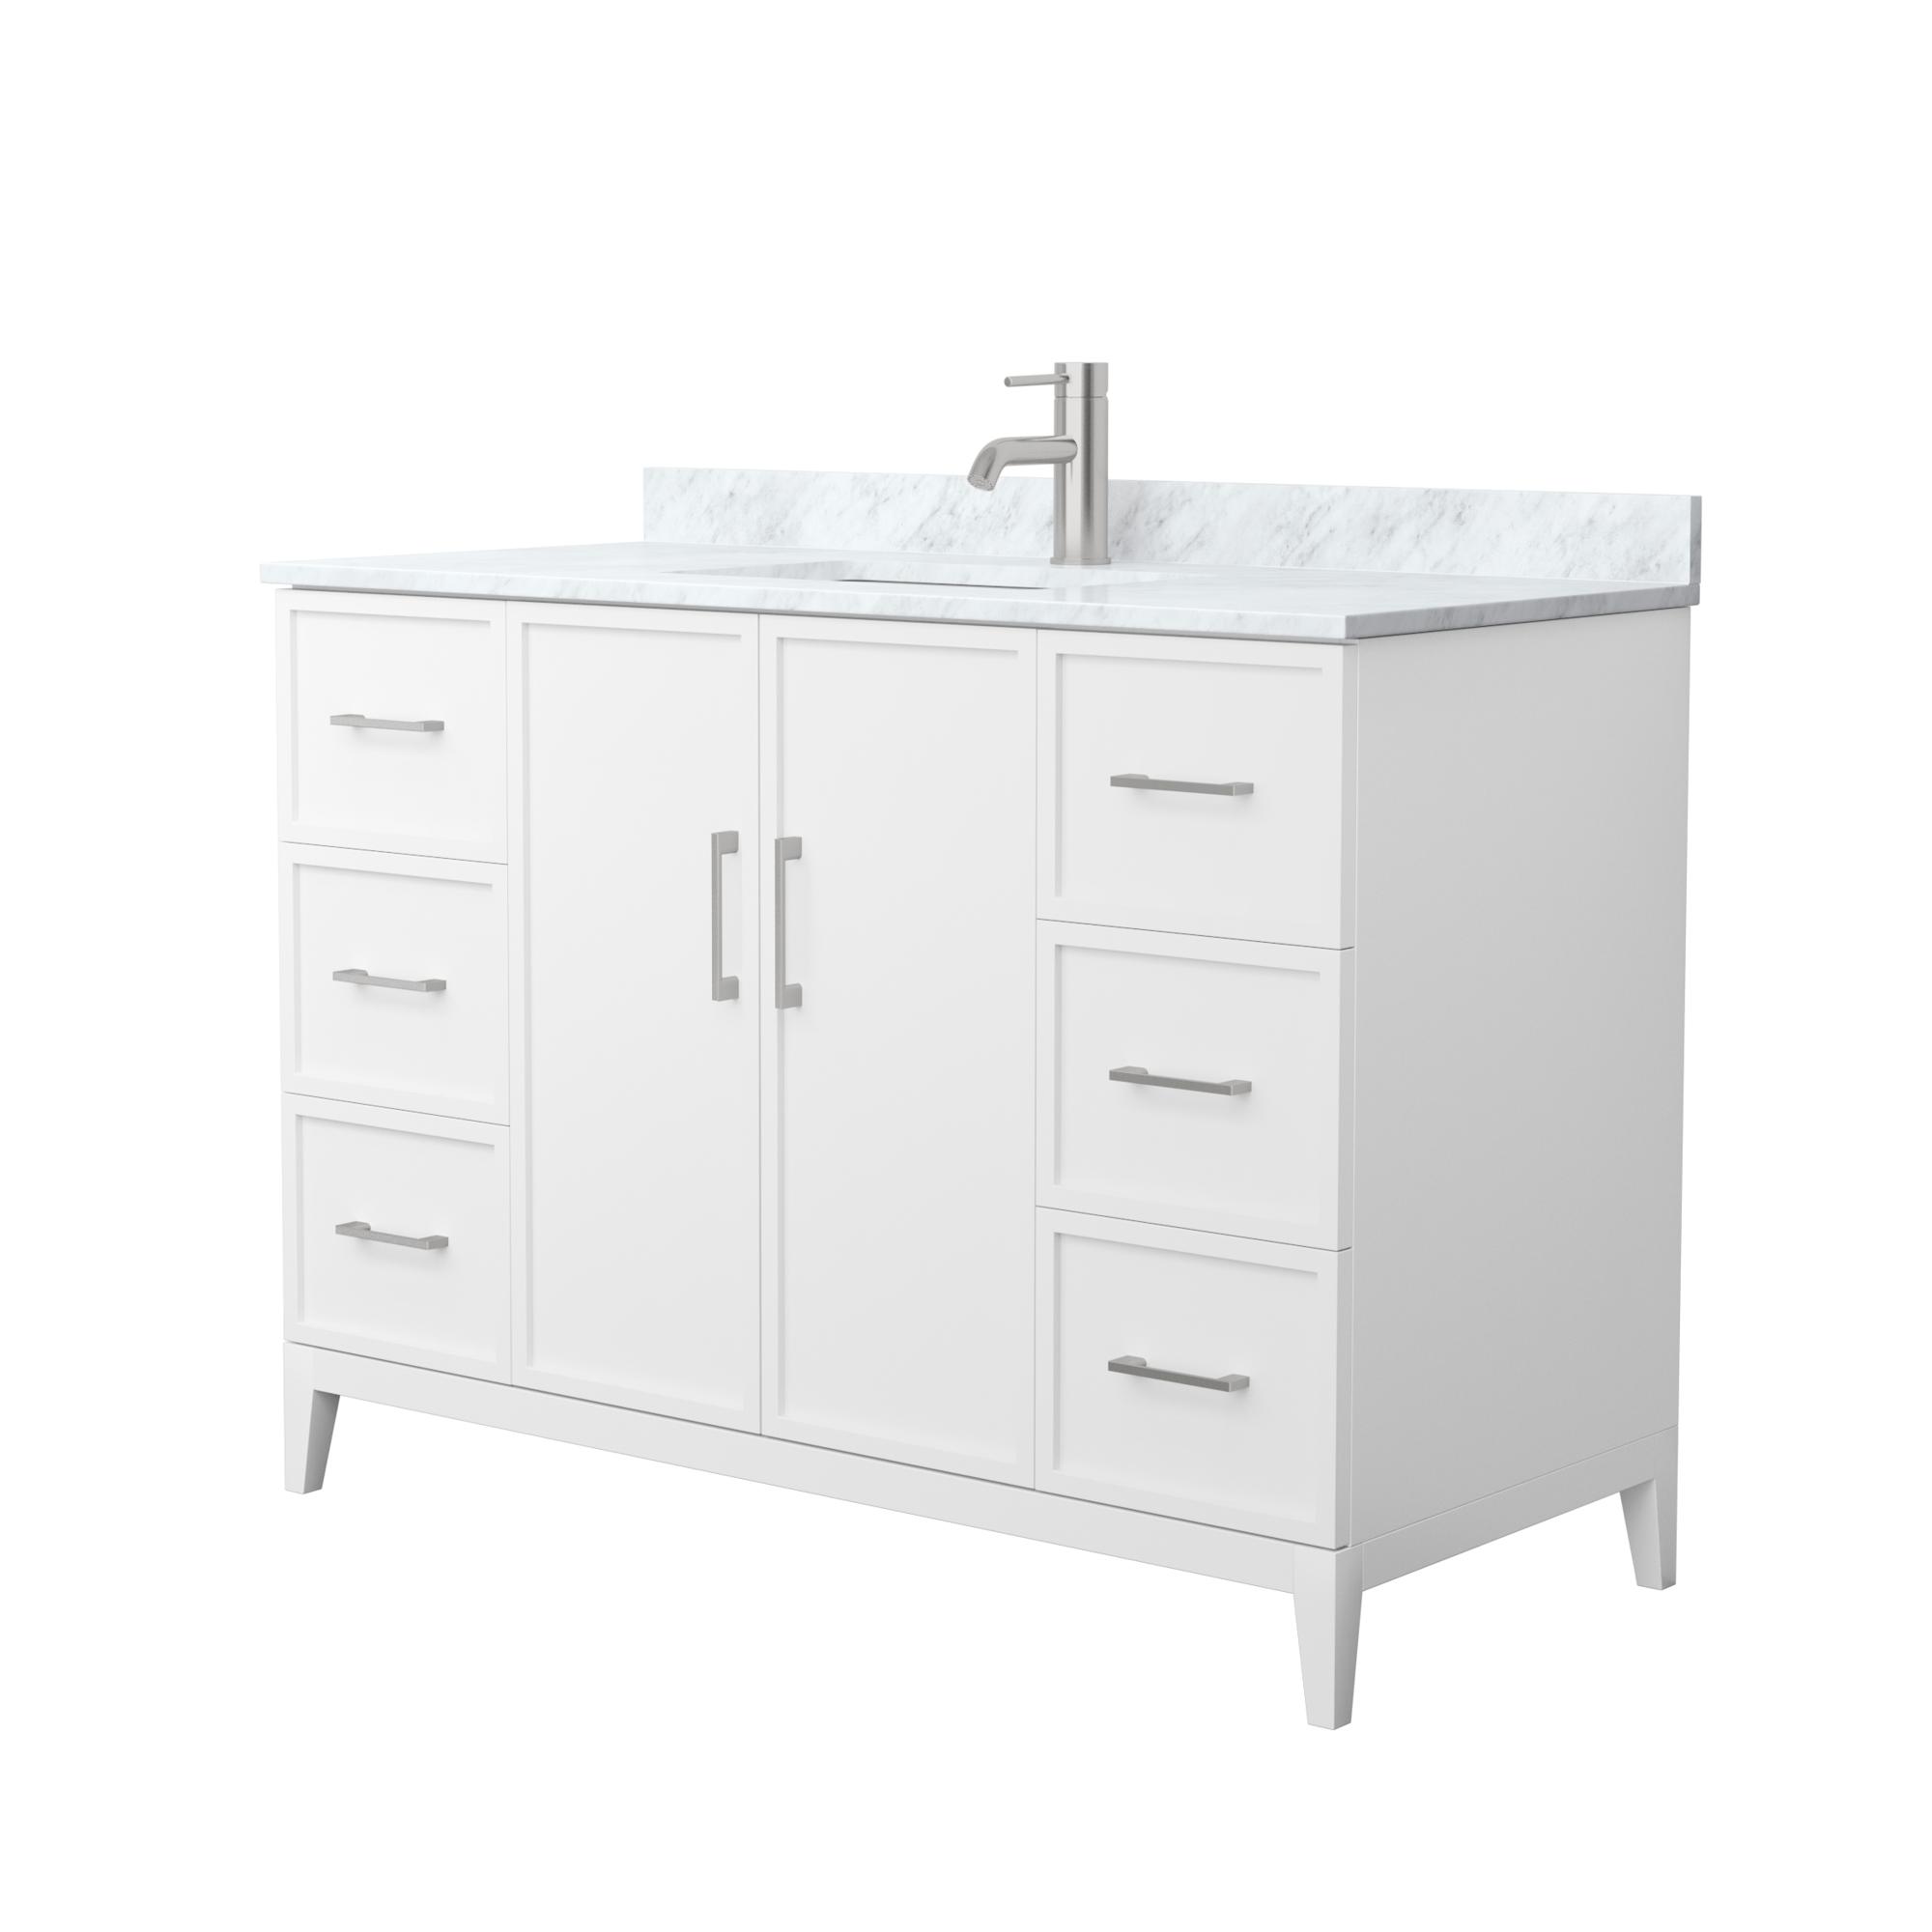 48" Transitional Single Vanity Base in White, 7 Top Options with 2 Hardware Option